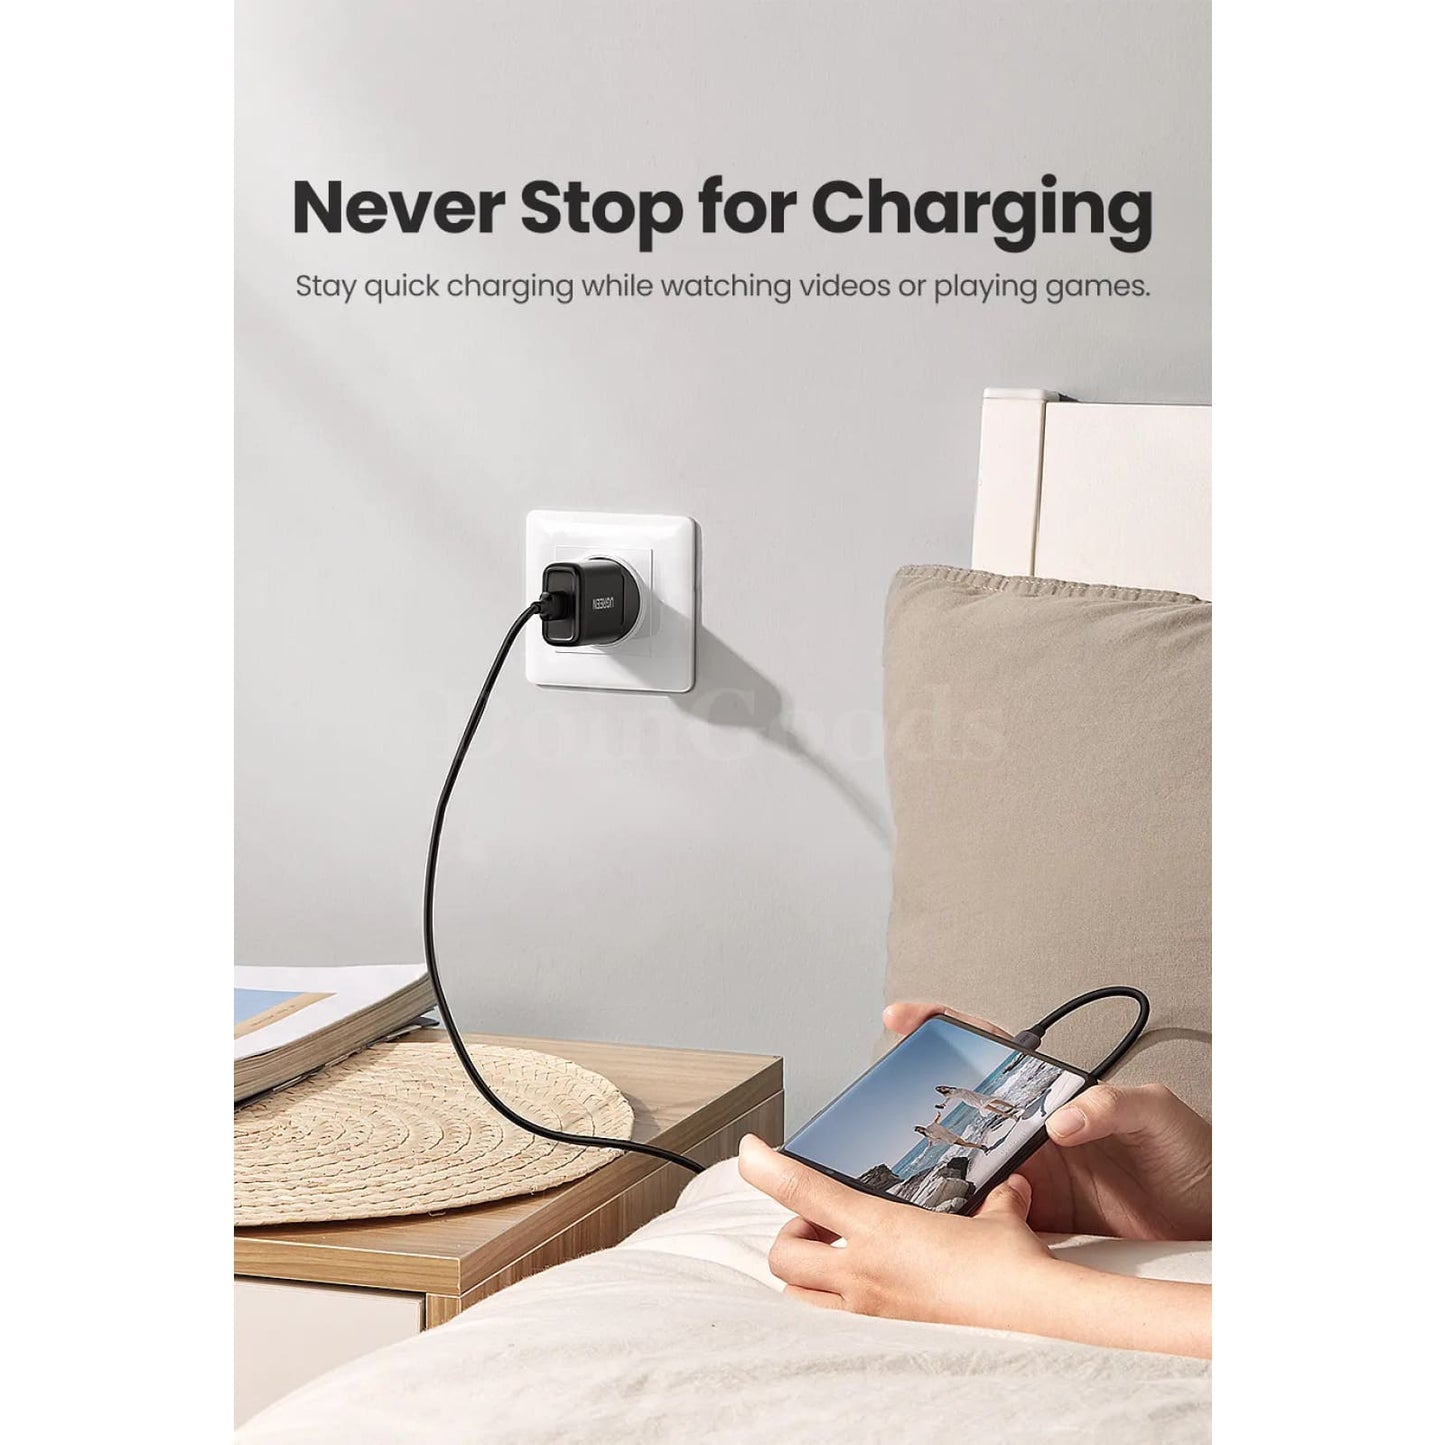 Ugreen Usb Quick Charge 3.0 Qc 18W Wall Fast Charger For Samsung Huawei Xiaomi 301635